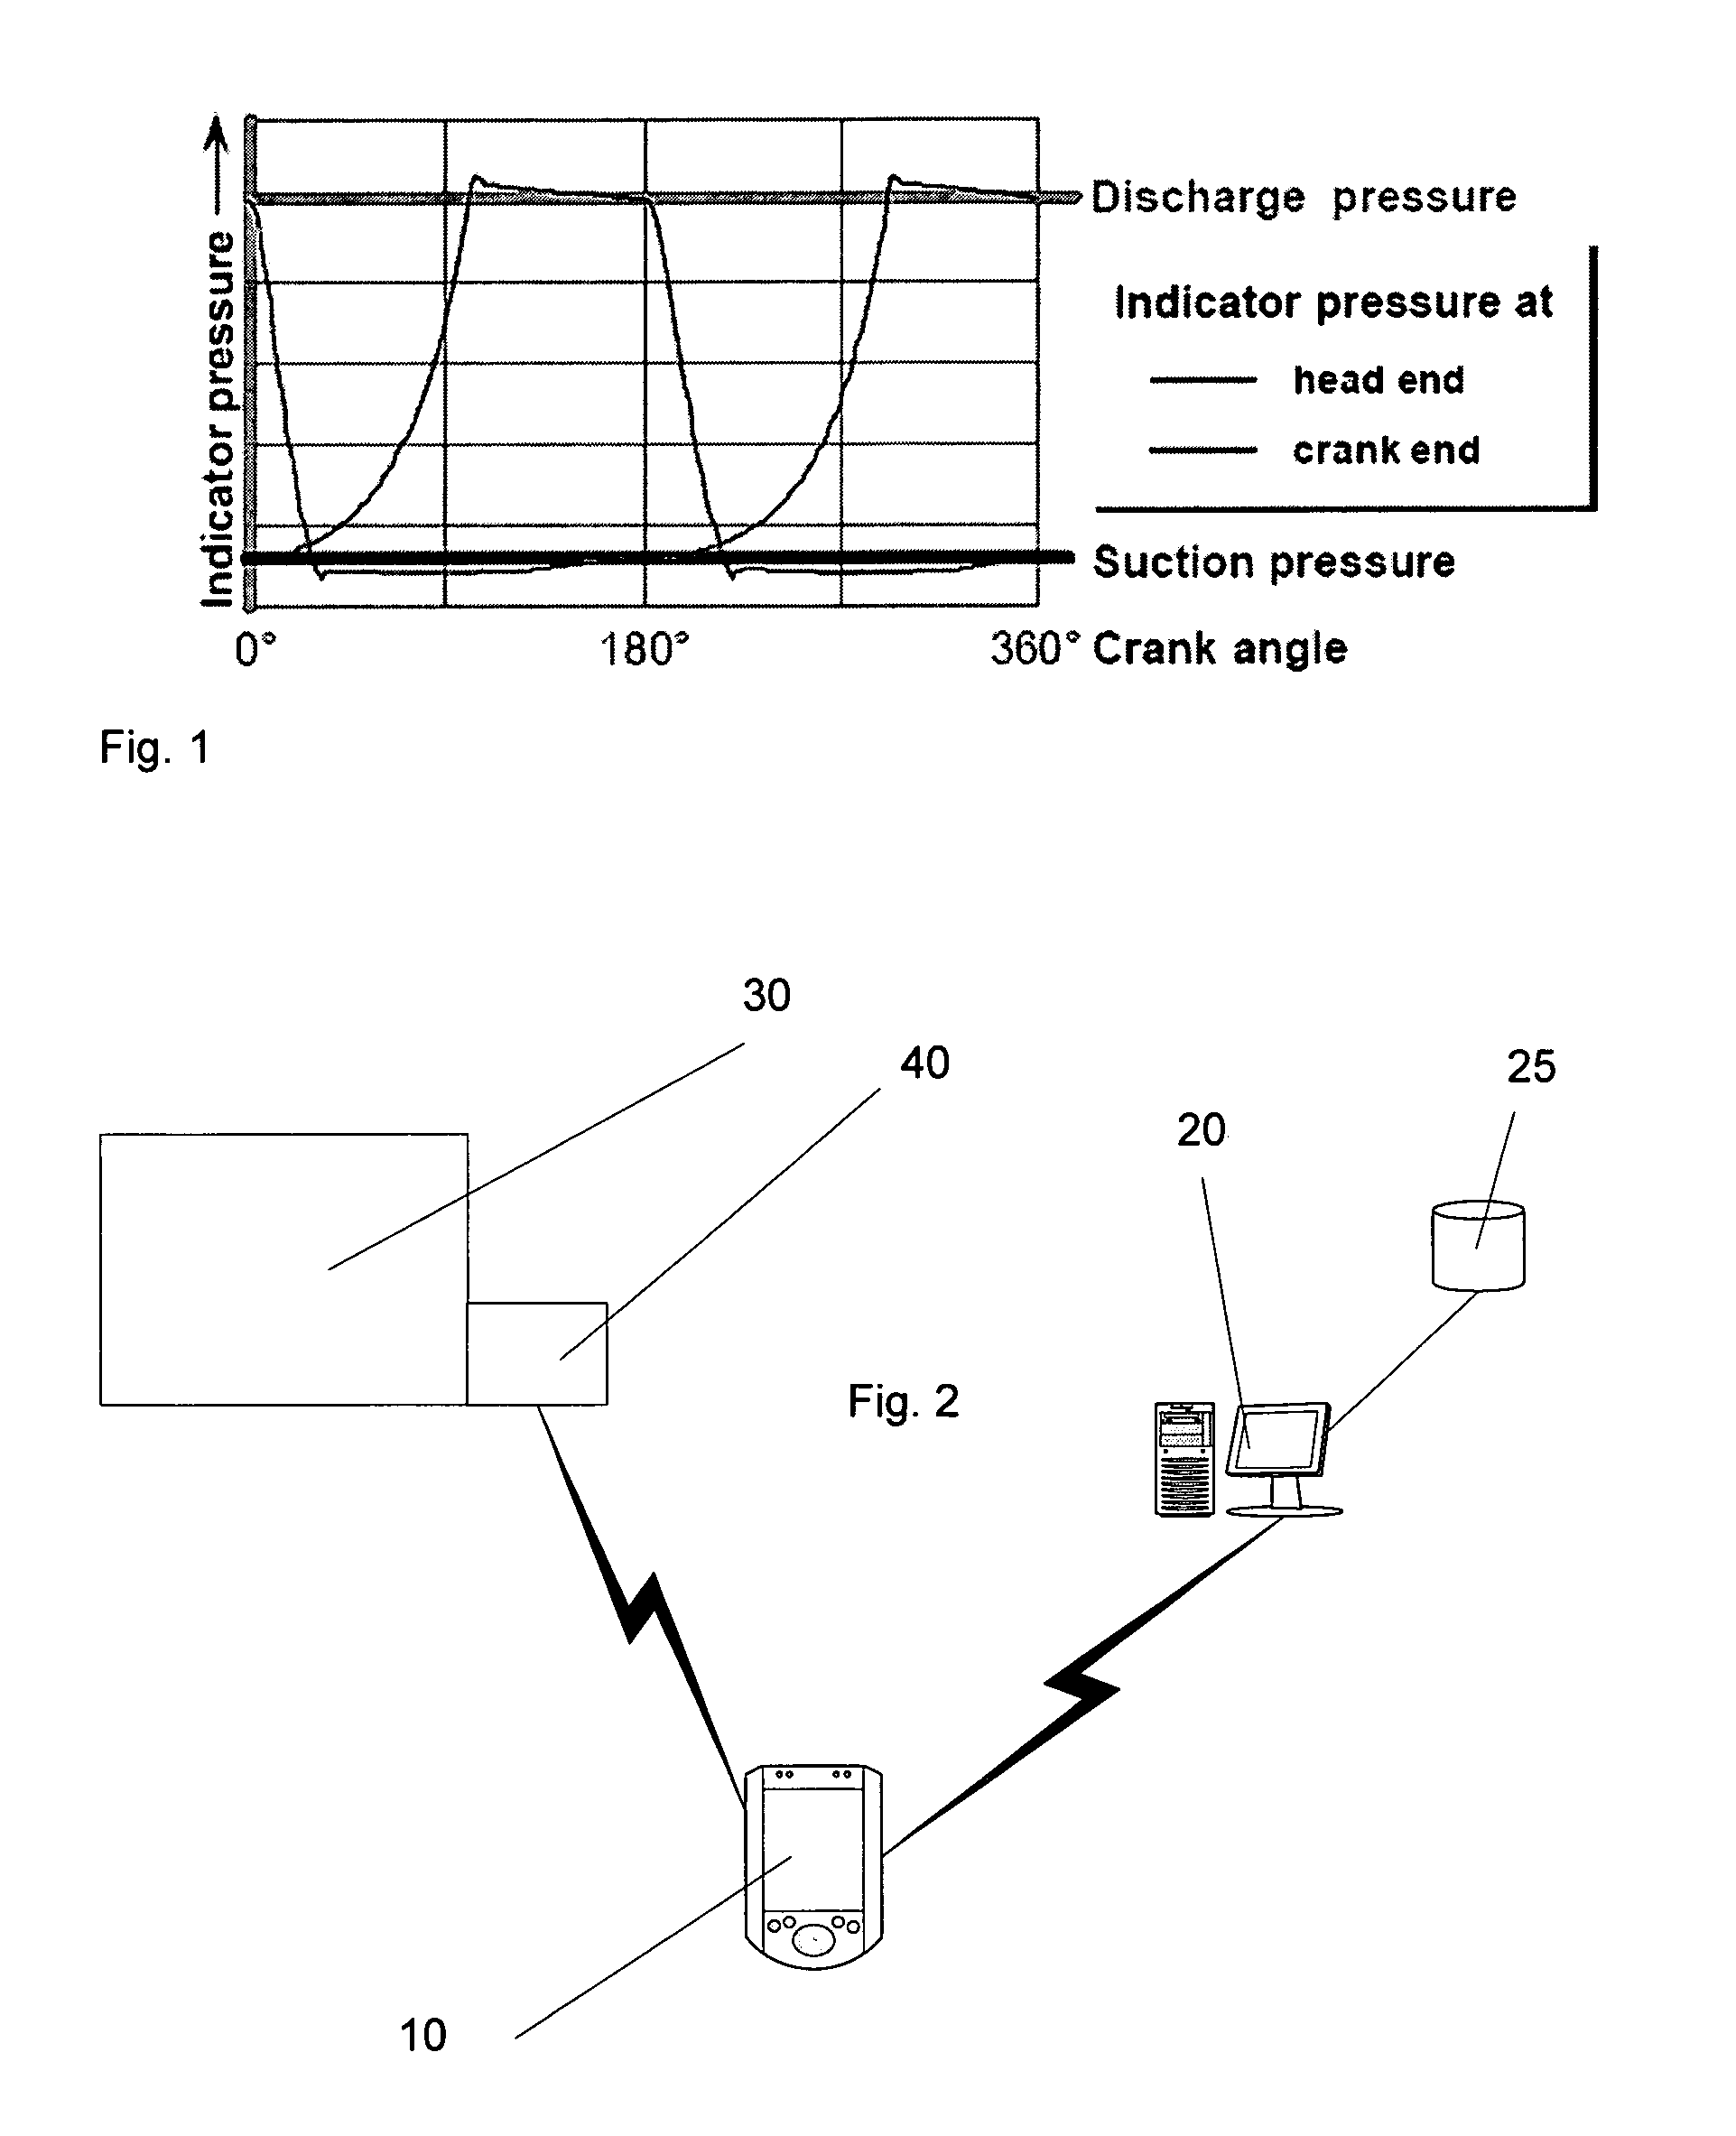 Valve monitoring system and method